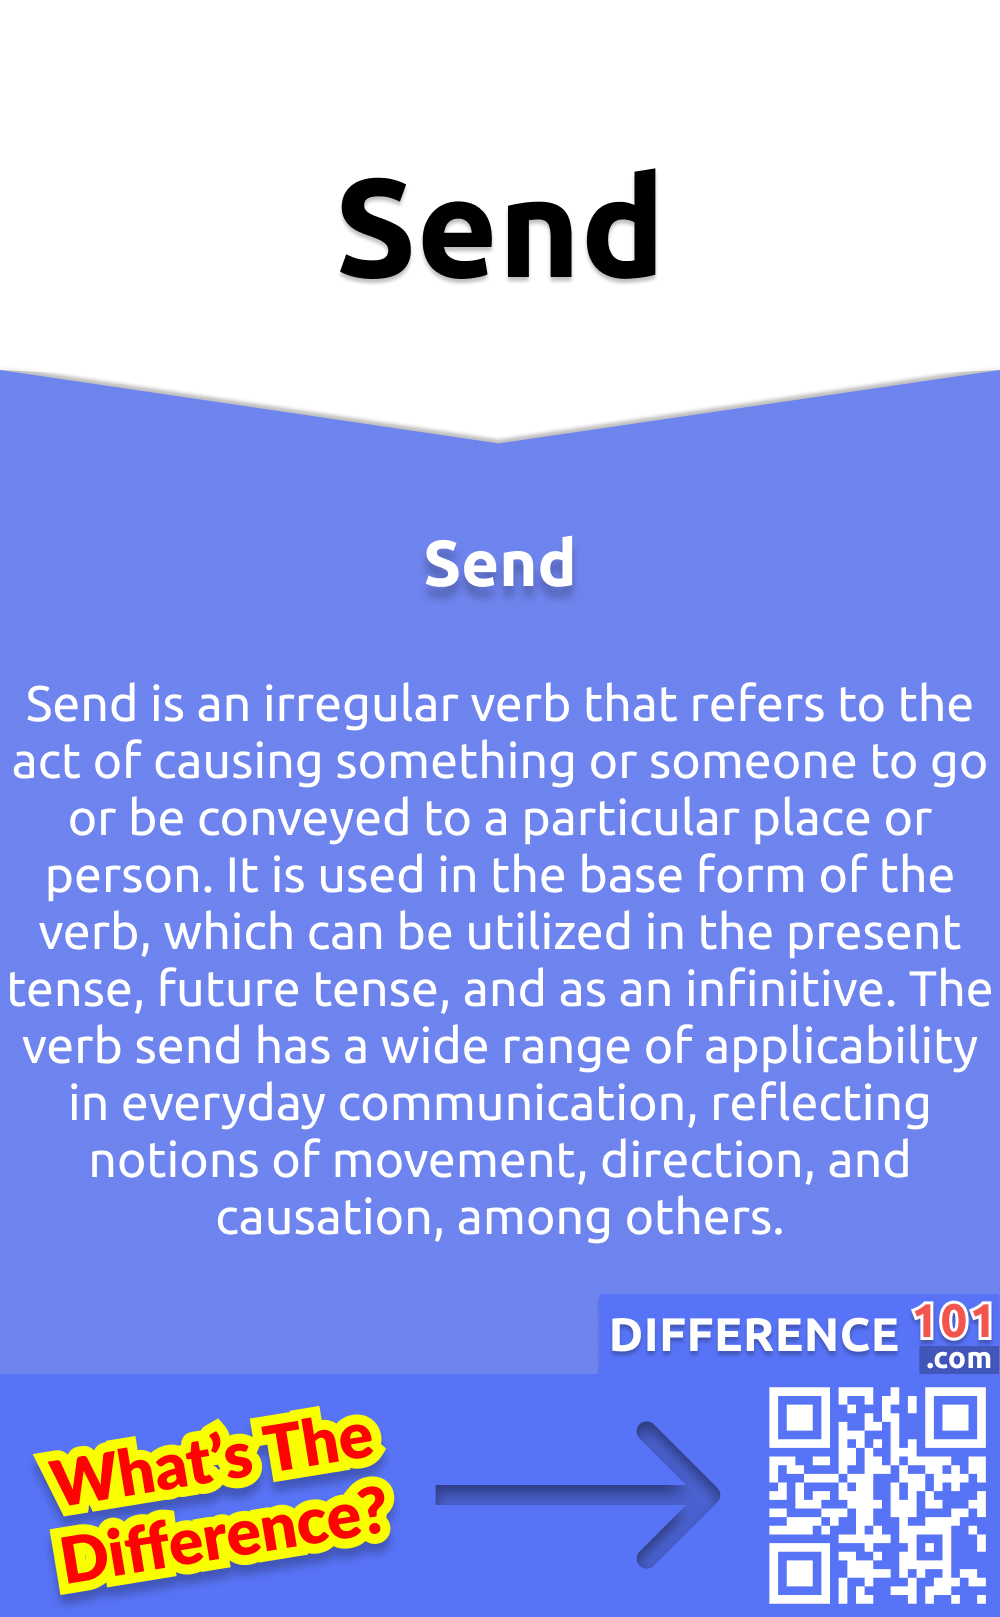 What Is Send? Send is an irregular verb that refers to the act of causing something or someone to go or be conveyed to a particular place or person. It is used in the base form of the verb, which can be utilized in the present tense, future tense, and as an infinitive. The verb send has a wide range of applicability in everyday communication, reflecting notions of movement, direction, and causation, among others. For instance, we might use "I'll send you an email," to signify the act of transmitting a message or document from the sender to the recipient via electronic communication means. Understanding the nuances of "send" in different contexts will help individuals to communicate precisely and effectively.